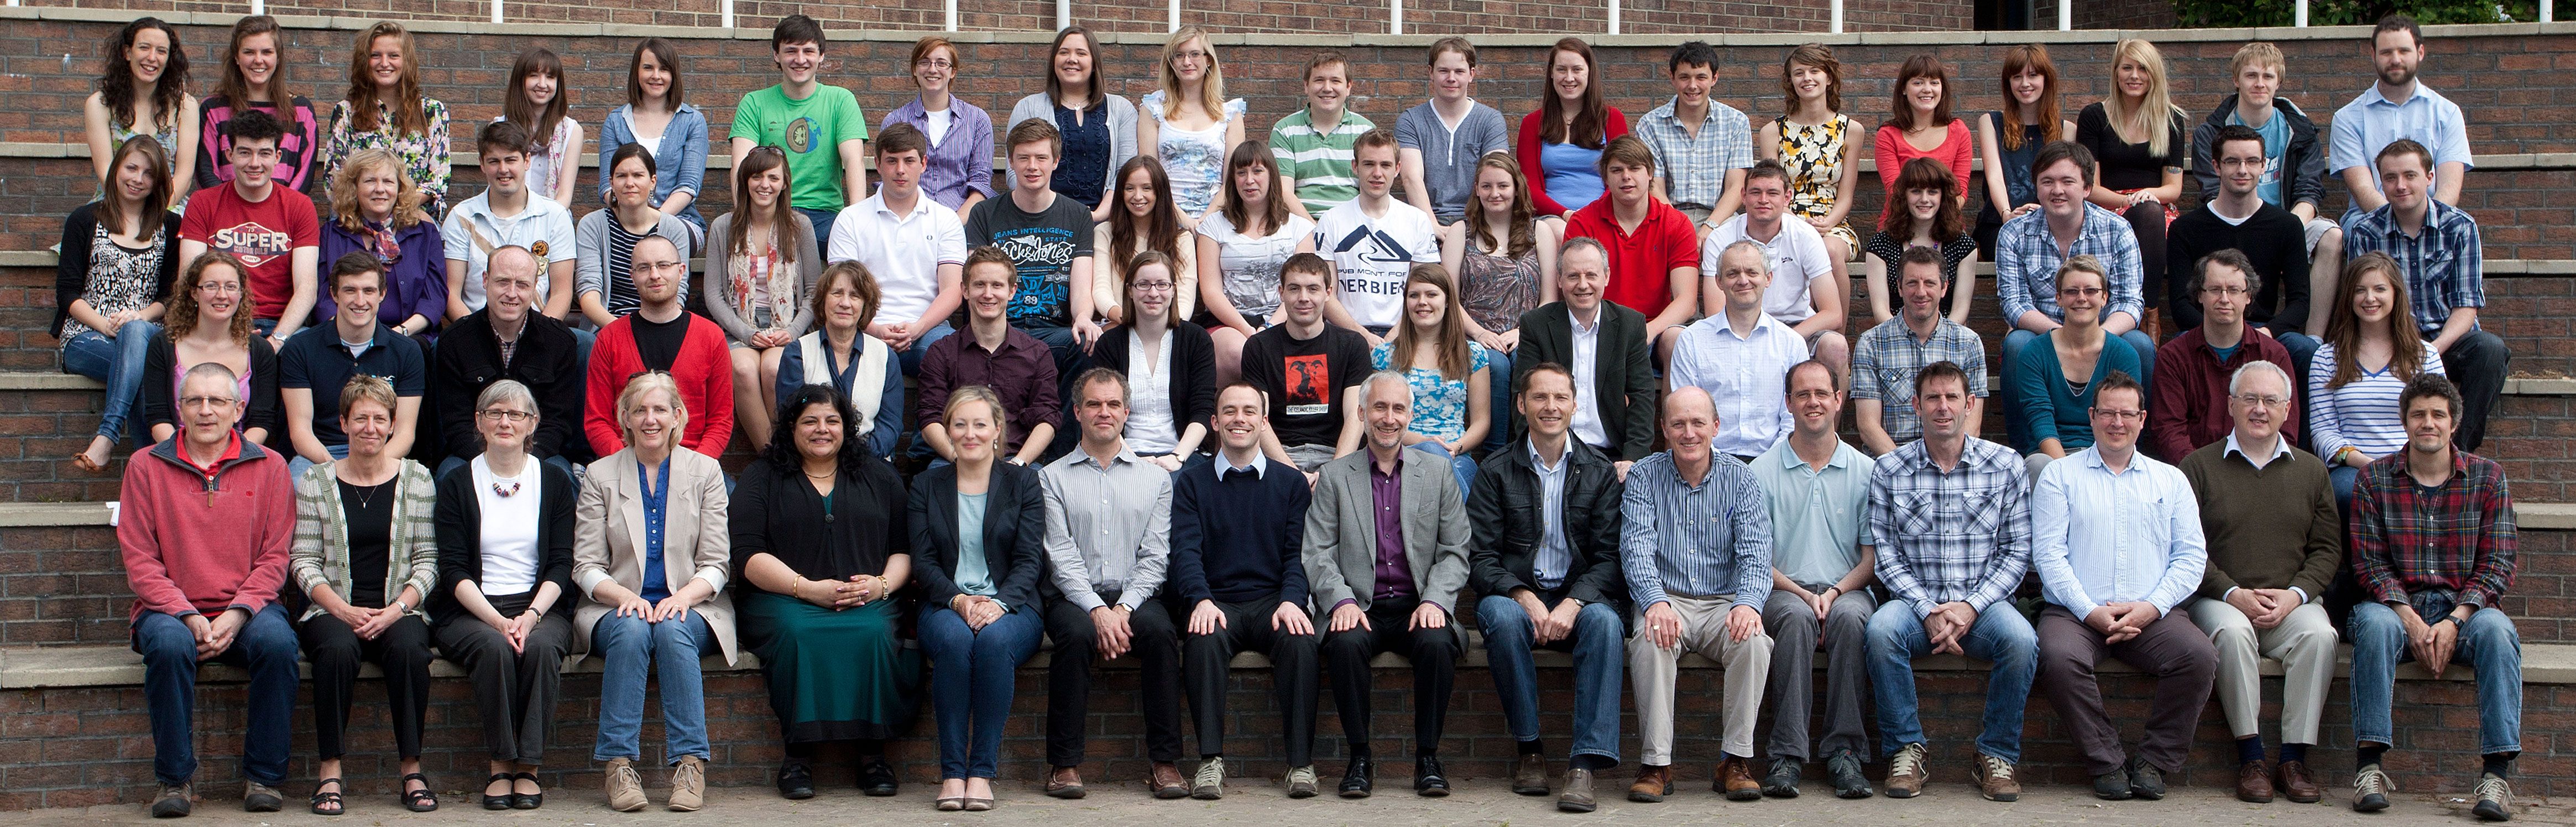 Geography Department Undergraduate Group photo from 2011